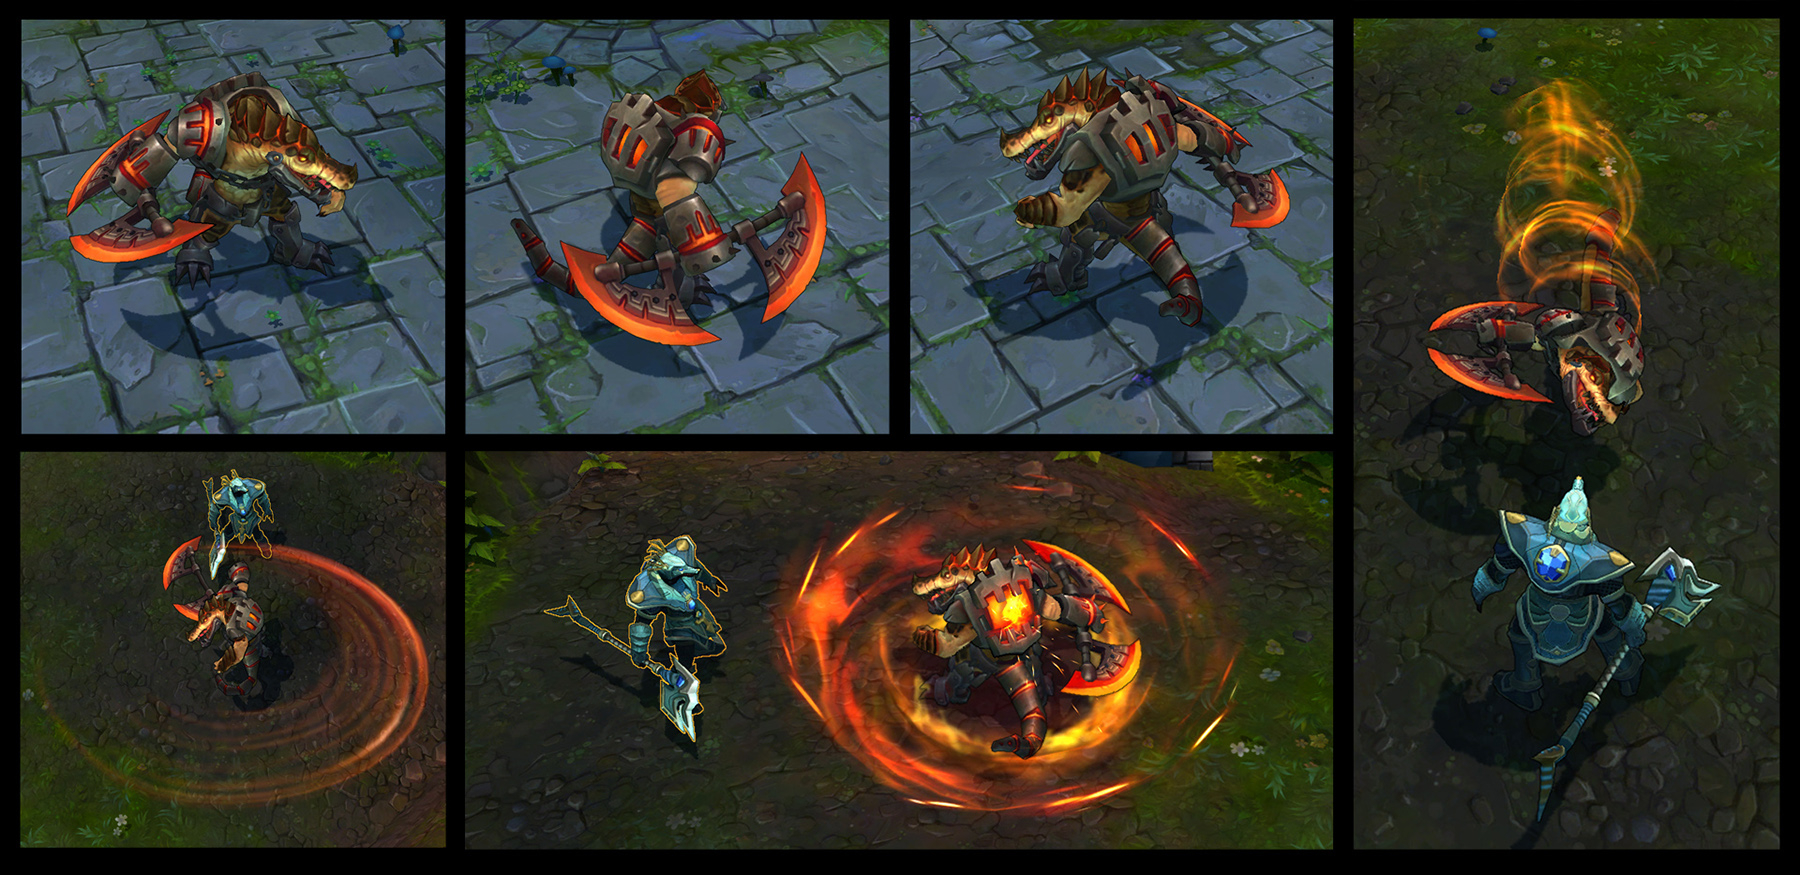 League Of Legends 4 2 Update Brings Scorched Earth Renekton For Just 975 Rp Neoseeker